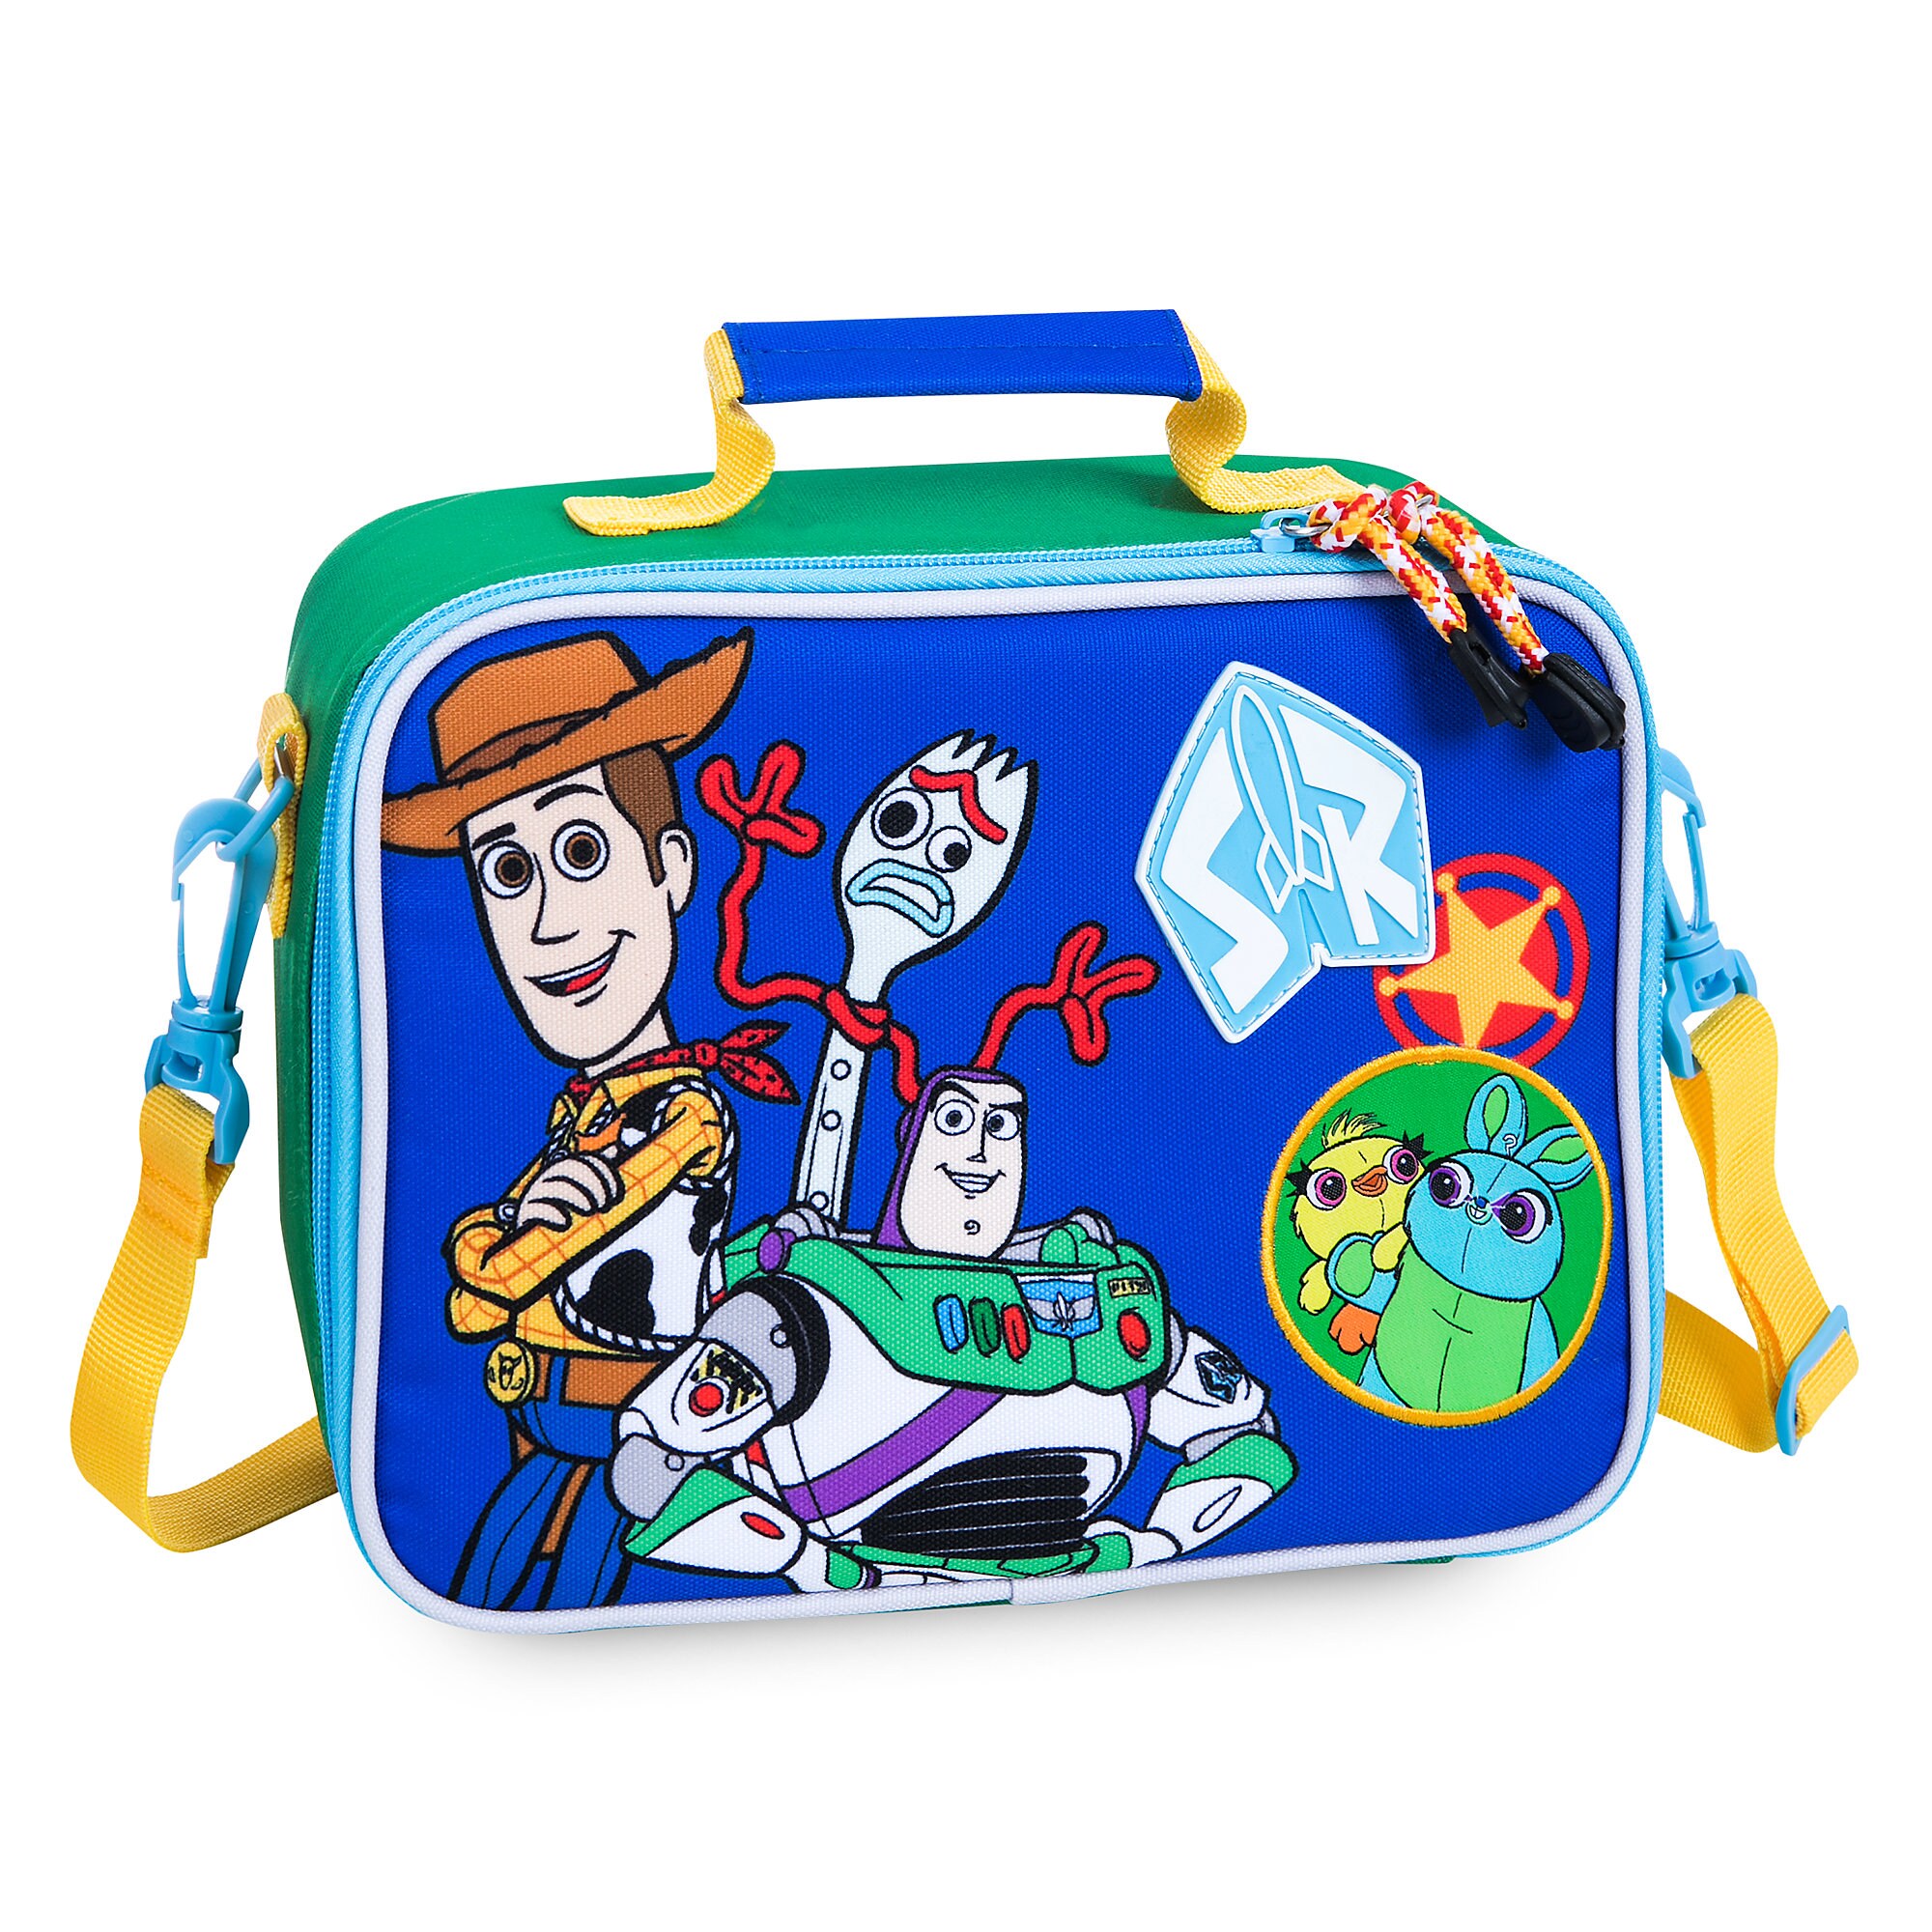 Toy Story 4 Lunch Box